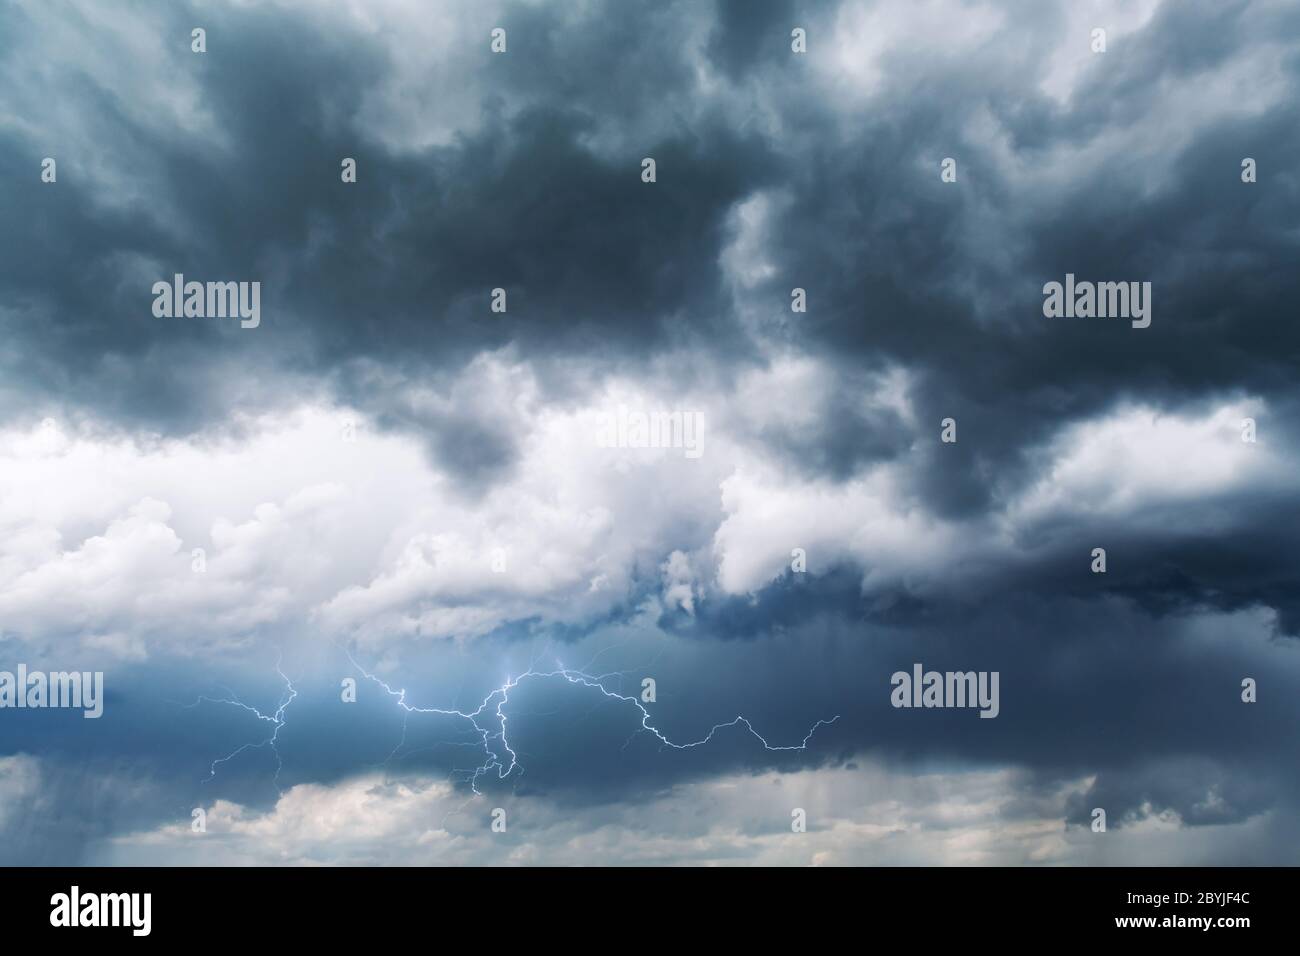 Dramatic storm clouds with rain and lightning closeup. Nature background Stock Photo